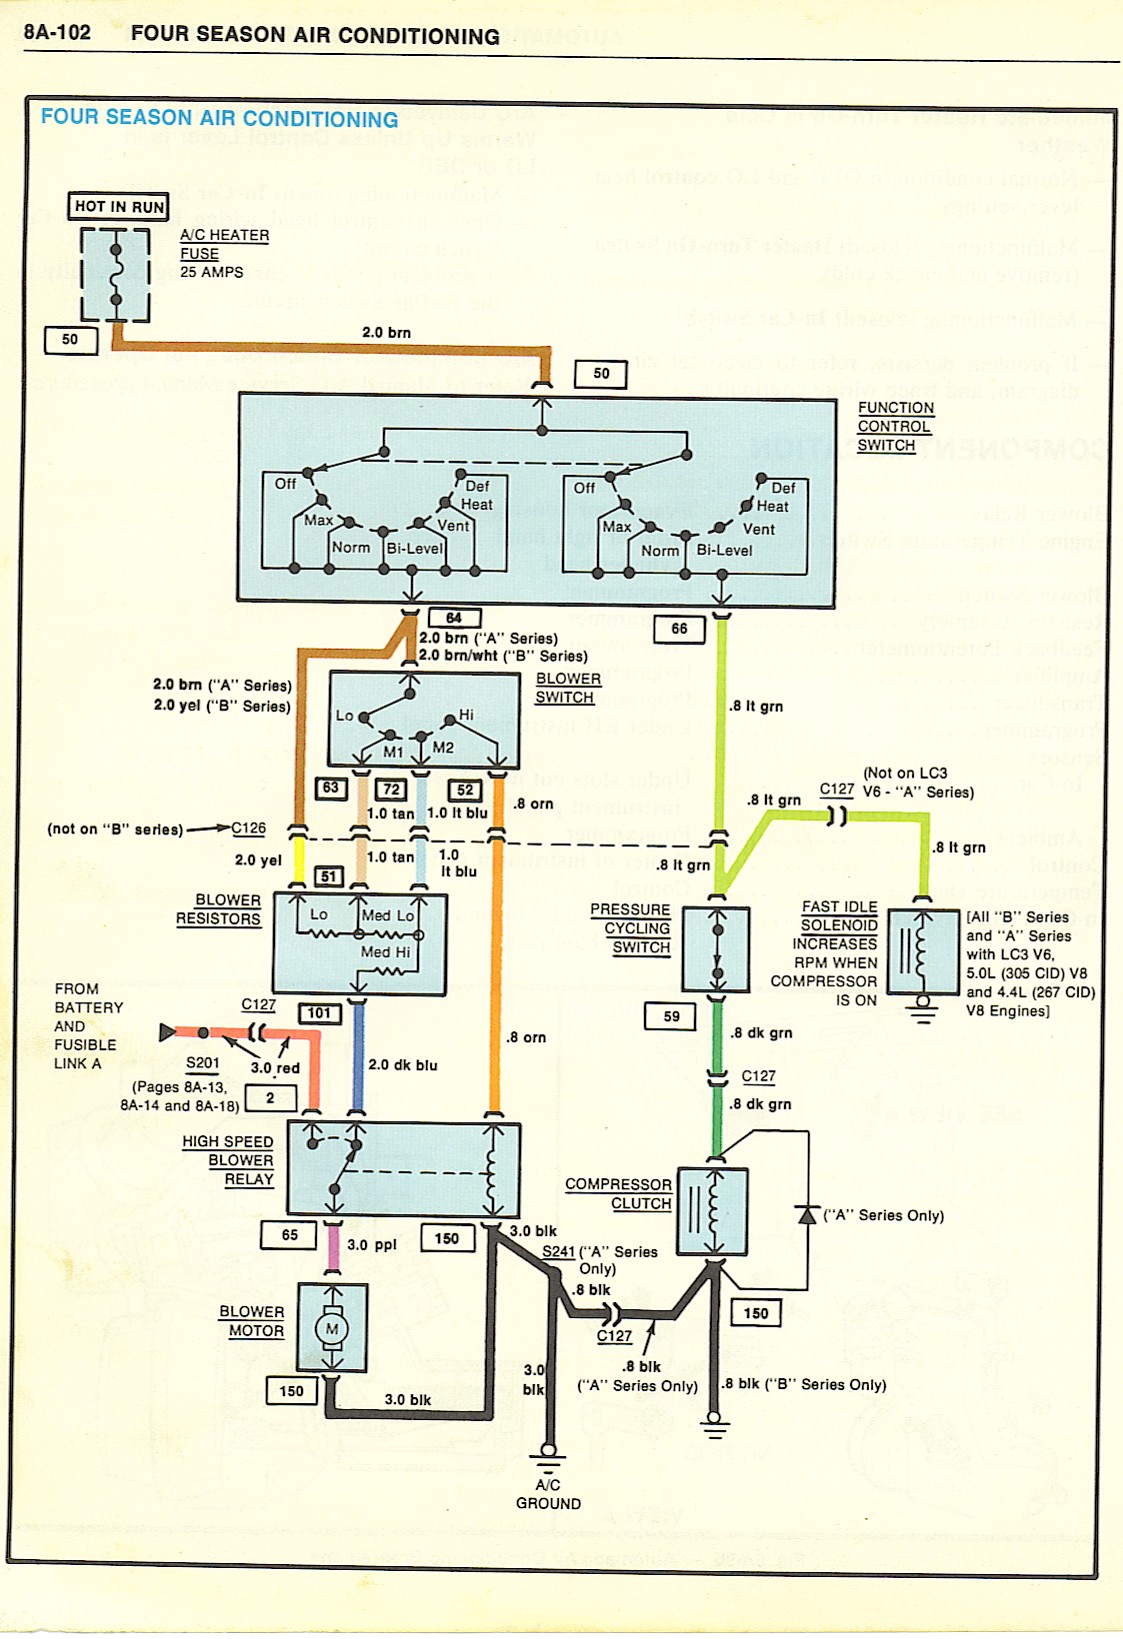 I need the wiring schematics for AC Compressor ...